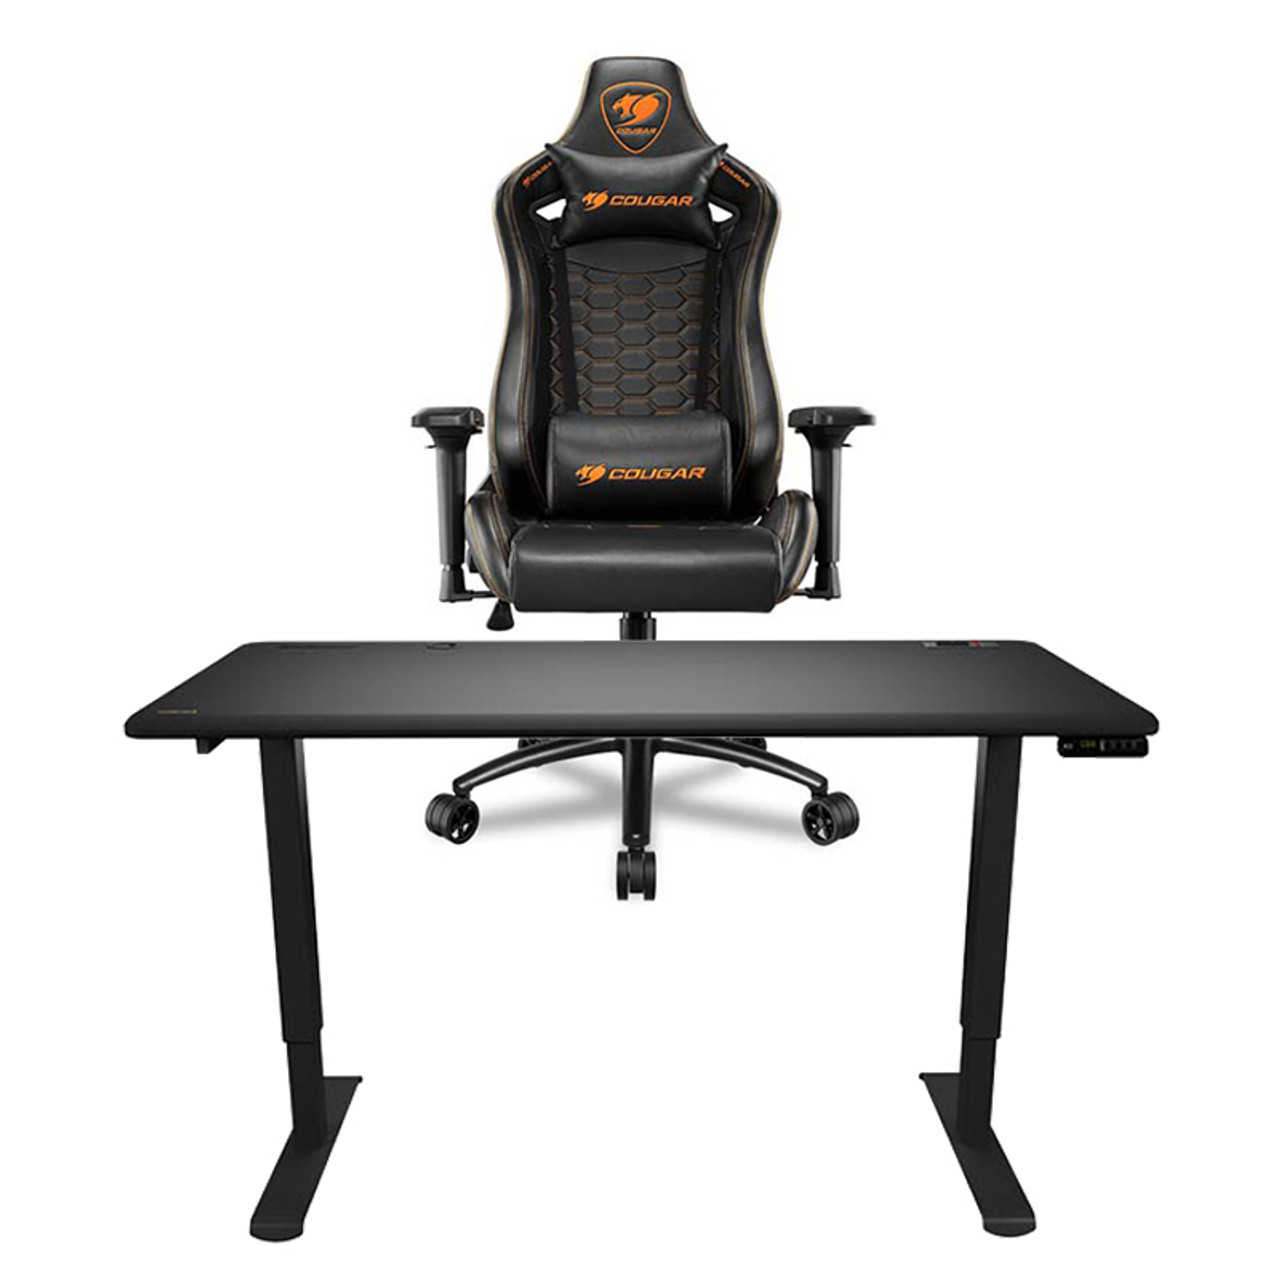  COUGAR Armor S Black Chairs, 1 : Home & Kitchen